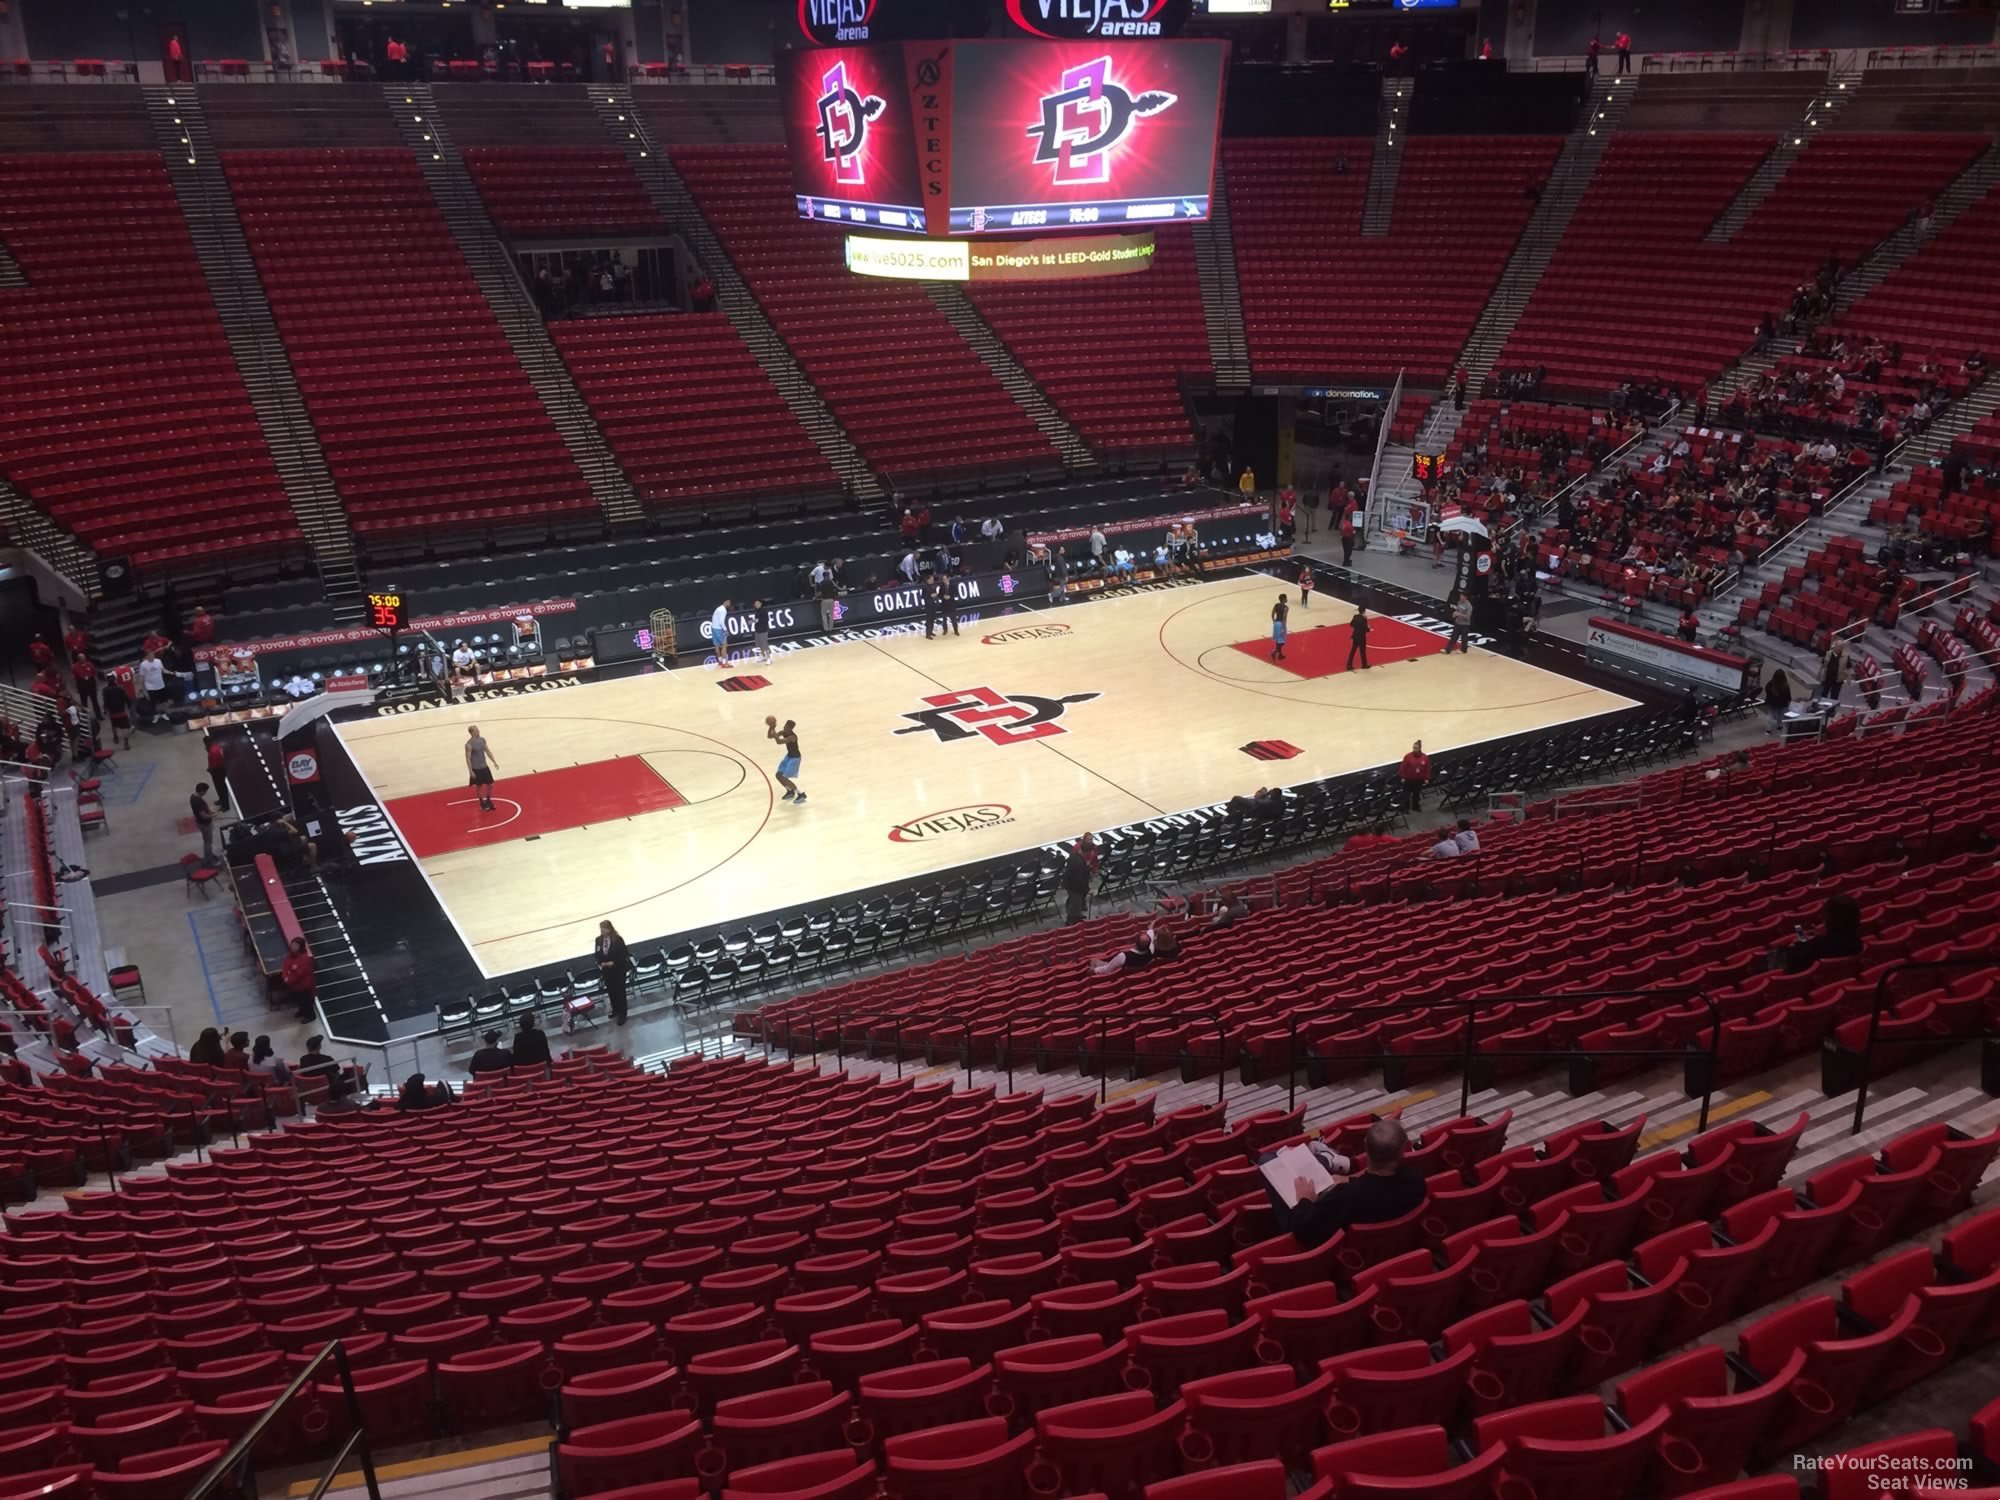 section d, row 30 seat view  - viejas arena